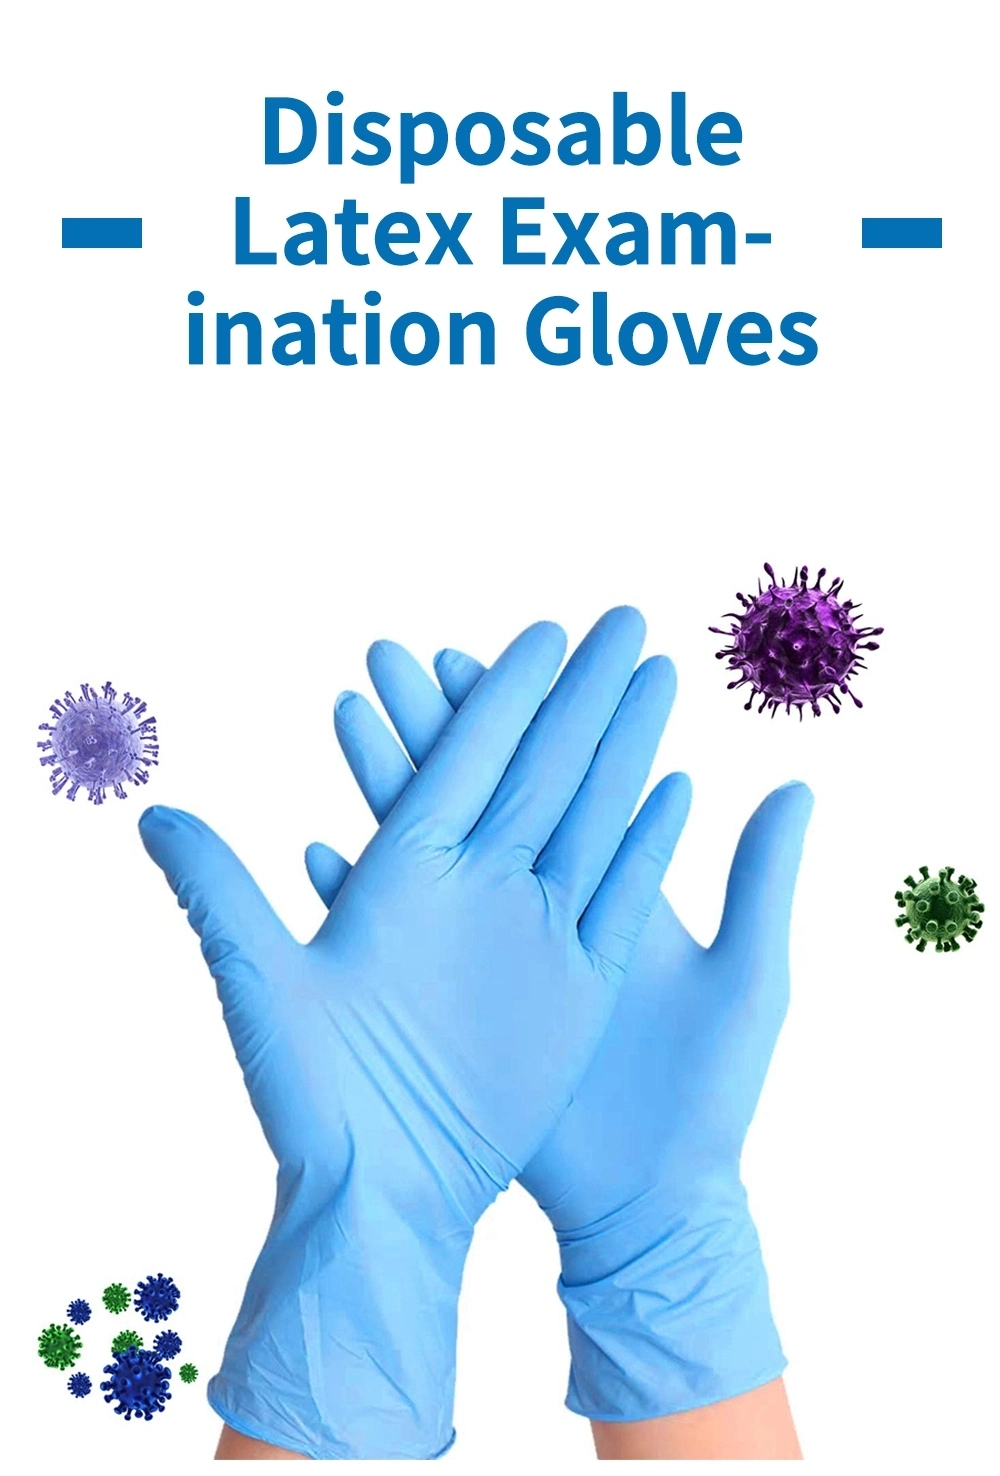 Factory Manufacture Medical Non-Medical Examination Disposable Nitrile Glove Latex Vinyl PE Gloves Powder Free Gloves